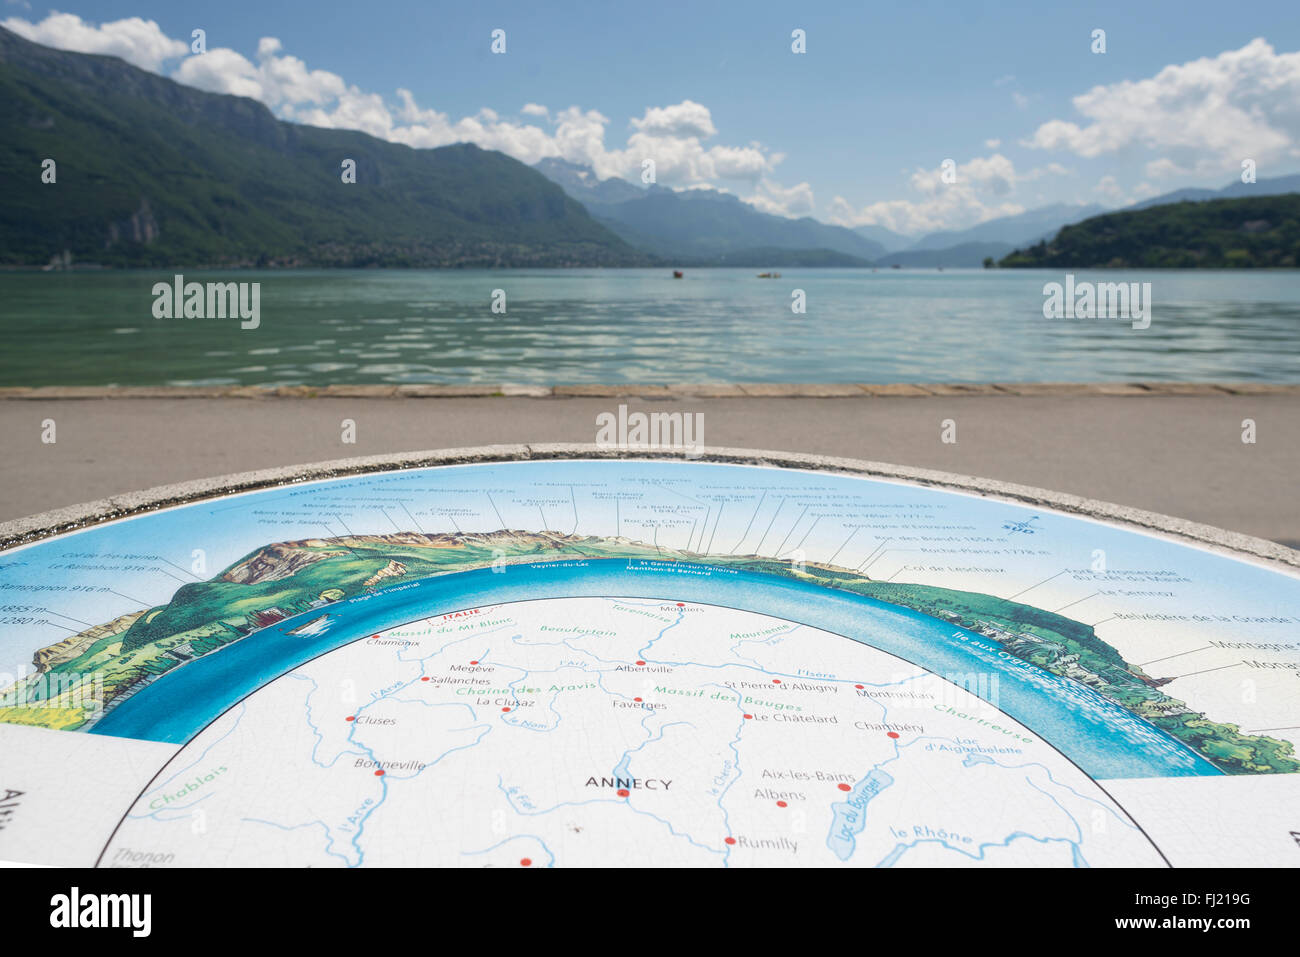 Panoramic map on the lakeside of Annecy with Lake Annecy and surrounding alpine mountains in the background, Savoy, France Stock Photo